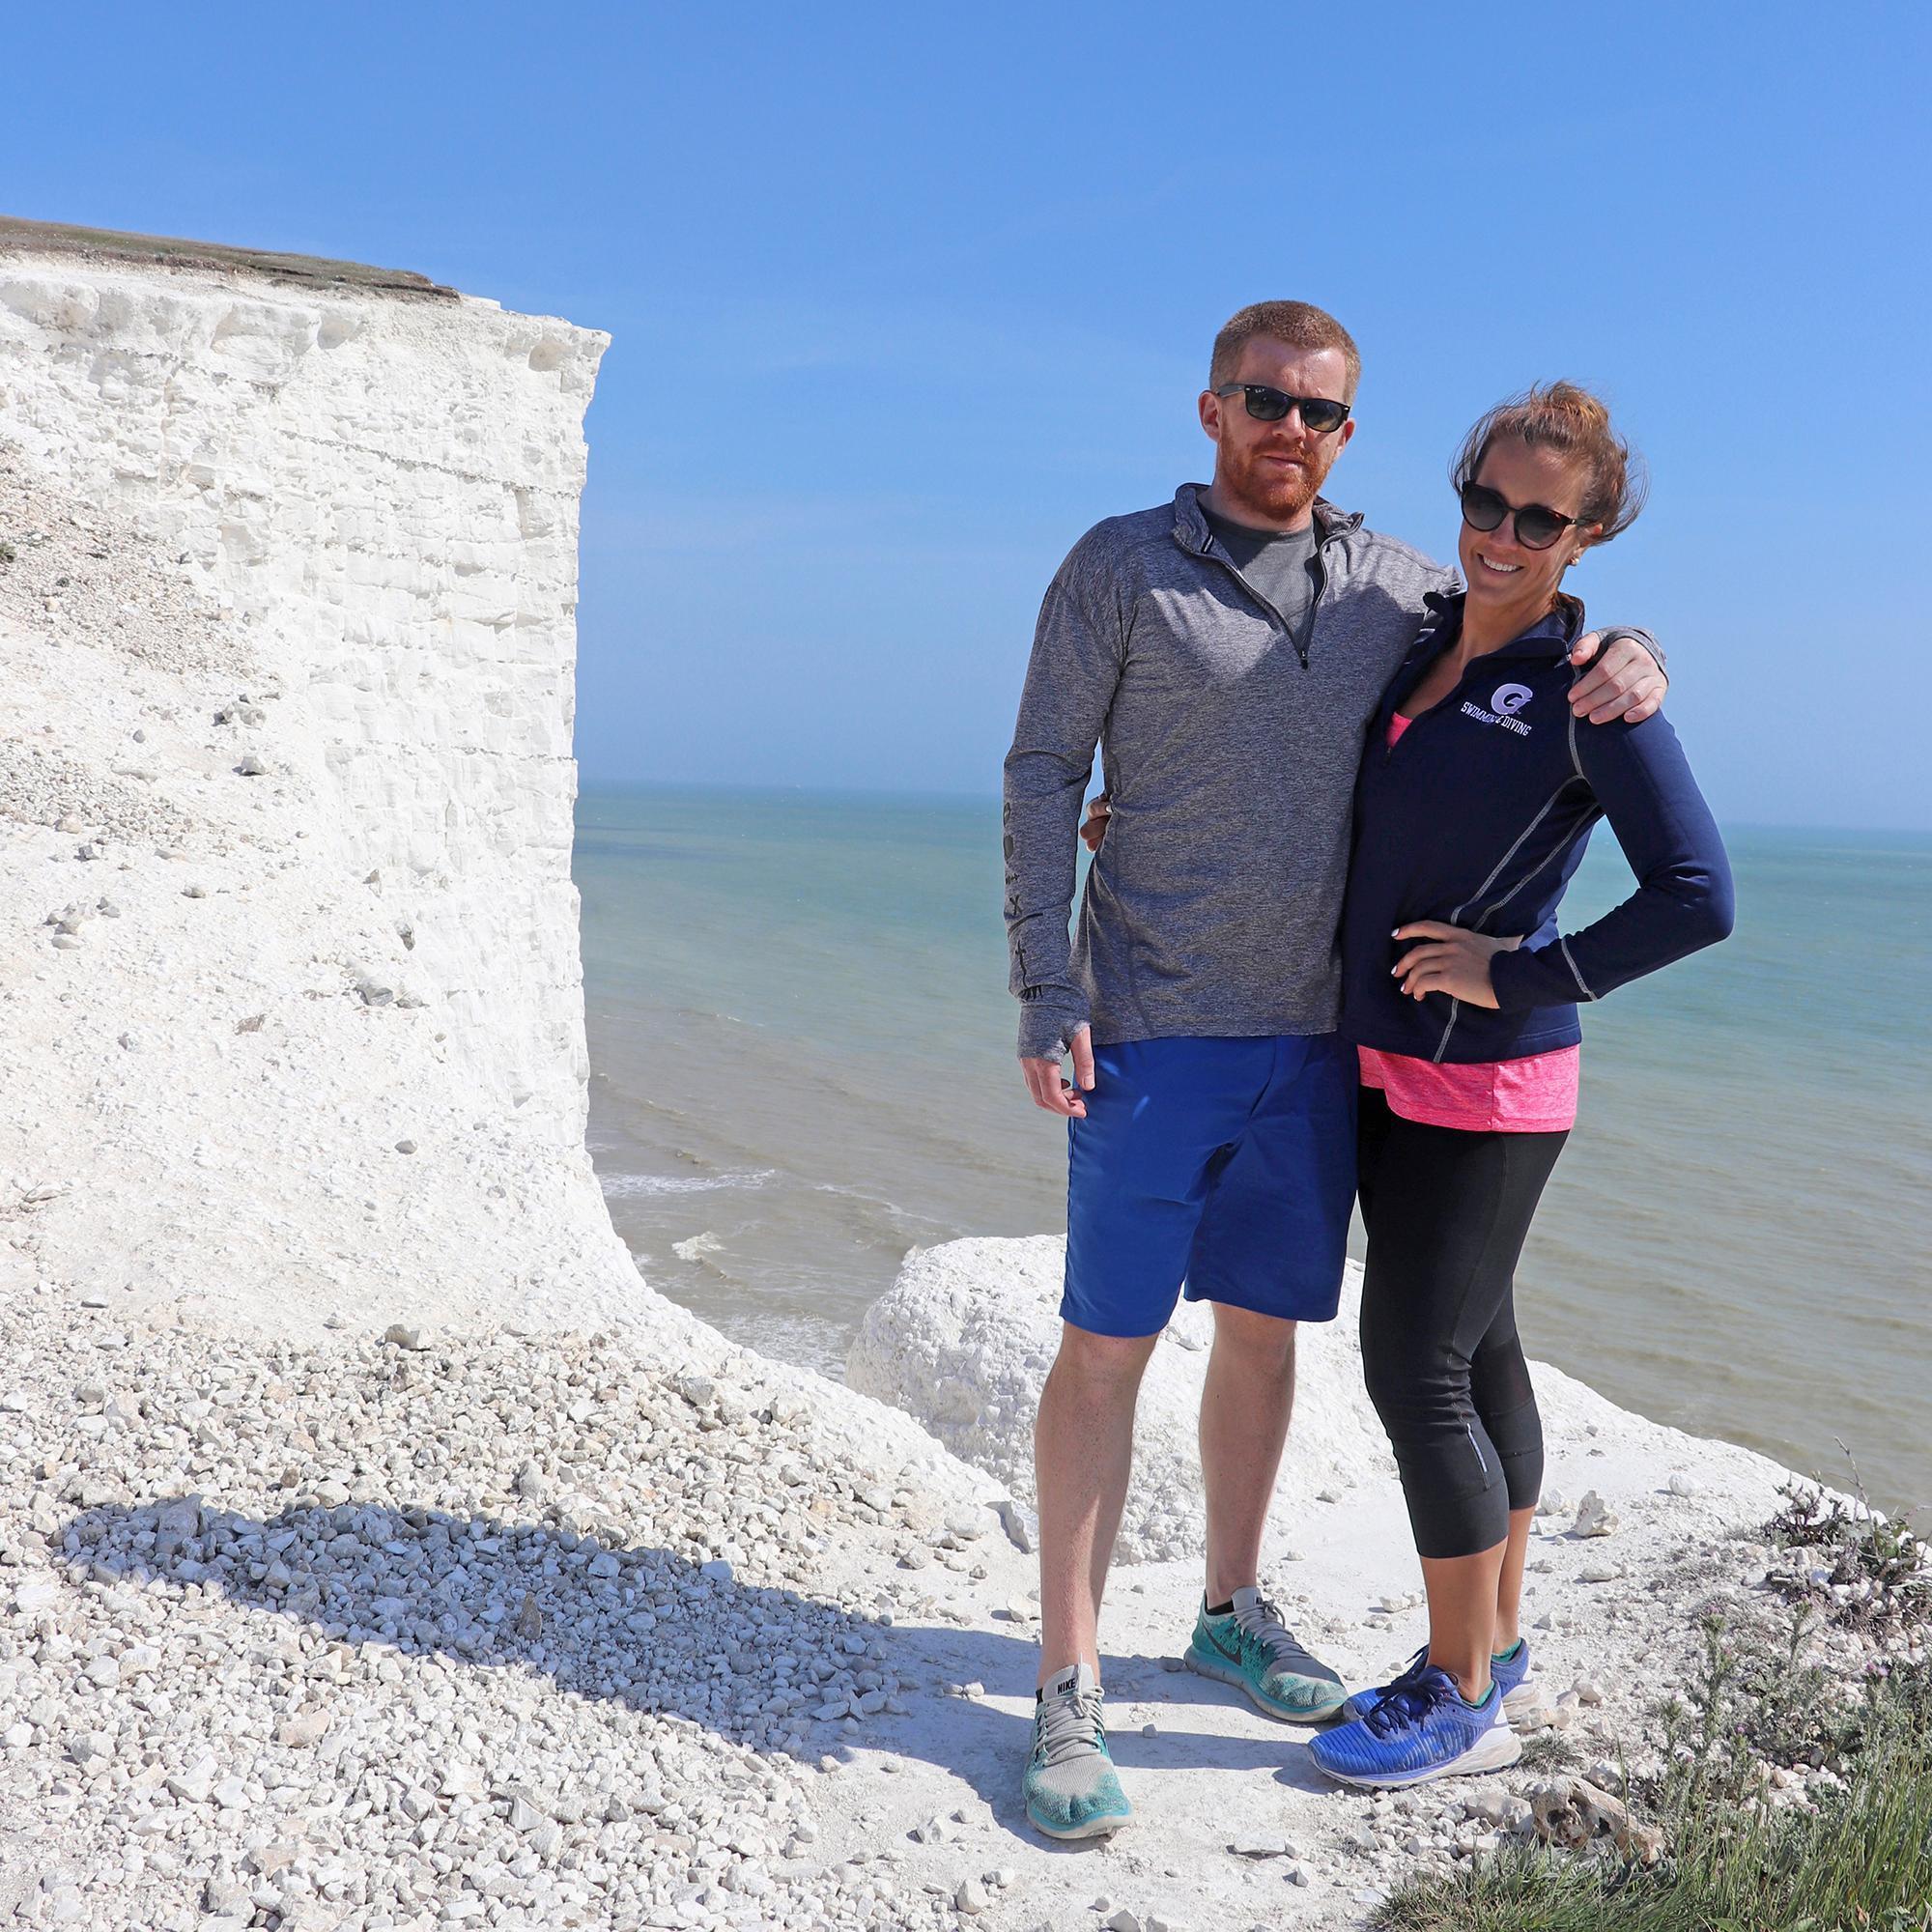 Hiking the Seven Sisters Cliffs in Southern England